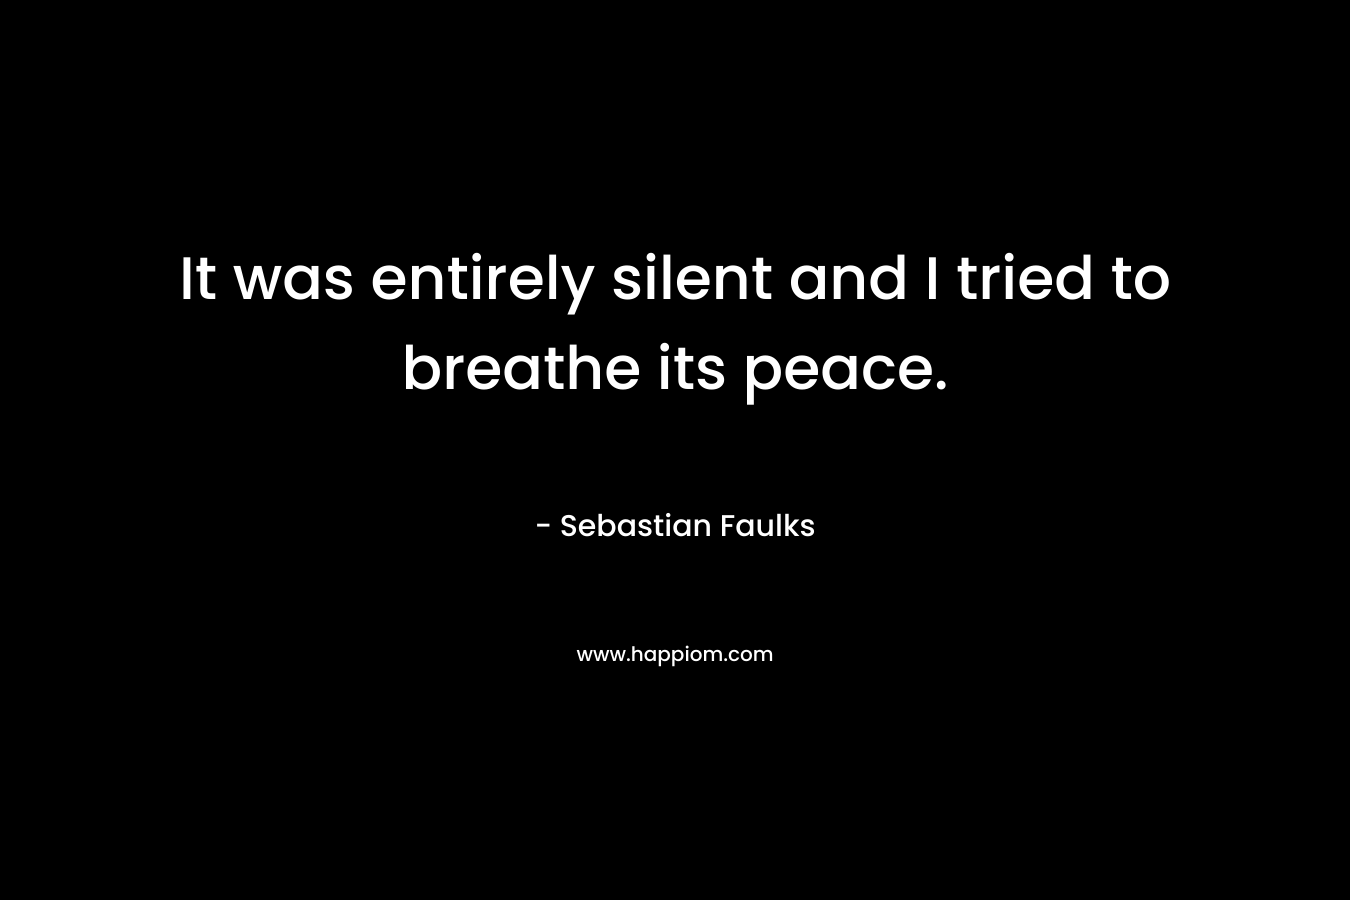 It was entirely silent and I tried to breathe its peace.